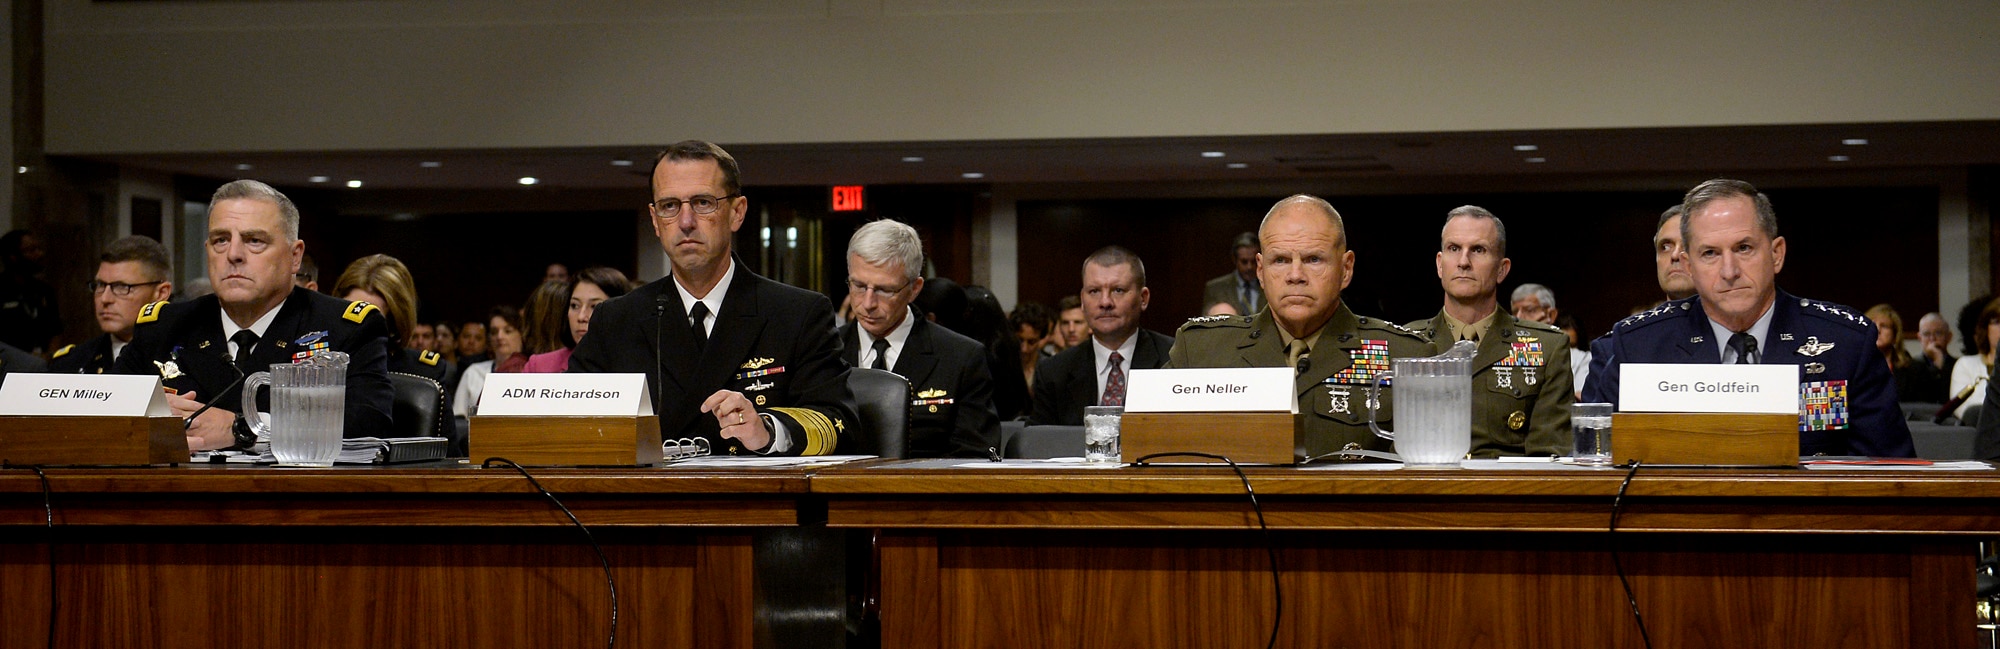 Air Force Chief of Staff Gen. Dave Goldfein testifies before the Senate Armed Services Committee during a hearing about Defense Department readiness Sept. 15, 2016, in Washington, D.C.  Goldfein joined Chief of Staff of the Army Gen. Mark A. Milley, Chief of Naval Operations Adm. John Richardson and Commandant of the Marine Corps Gen. Robert B. Neller during the hearing.  (U.S. Air Force photo/Scott M. Ash)